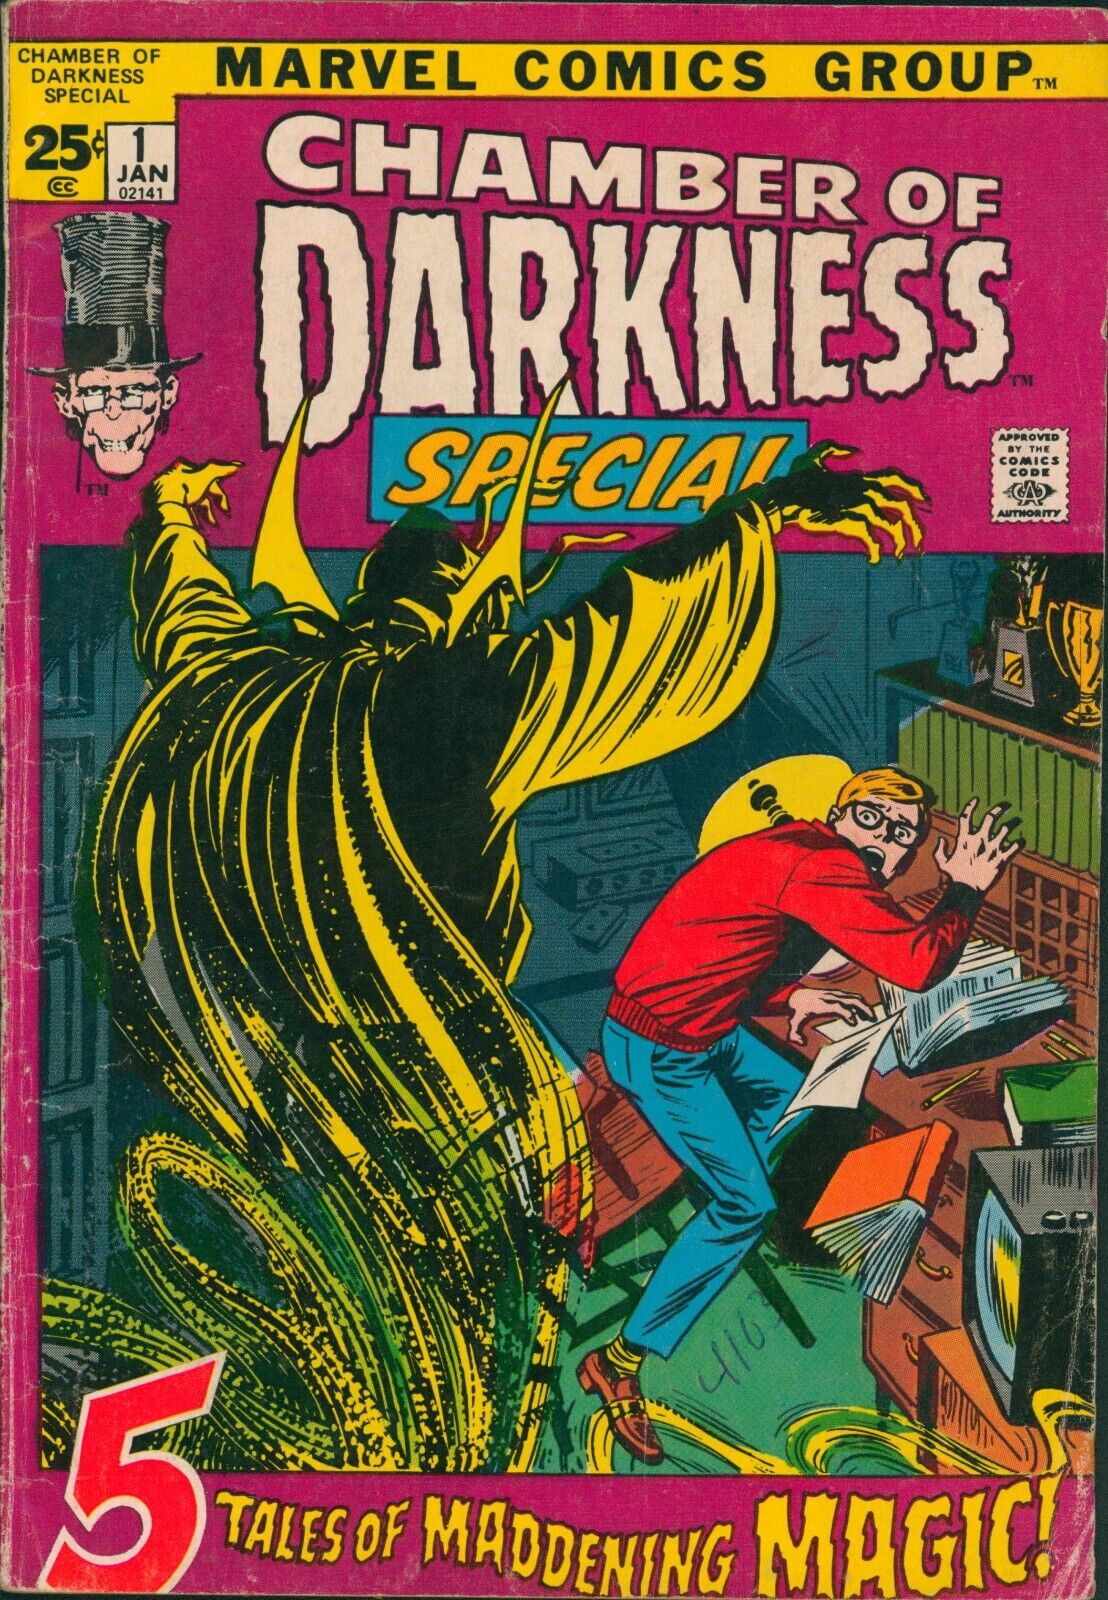 Chamber of Darkness Special #1 1/72 - It’s Only Magic; Always Leave ’Em Laughing